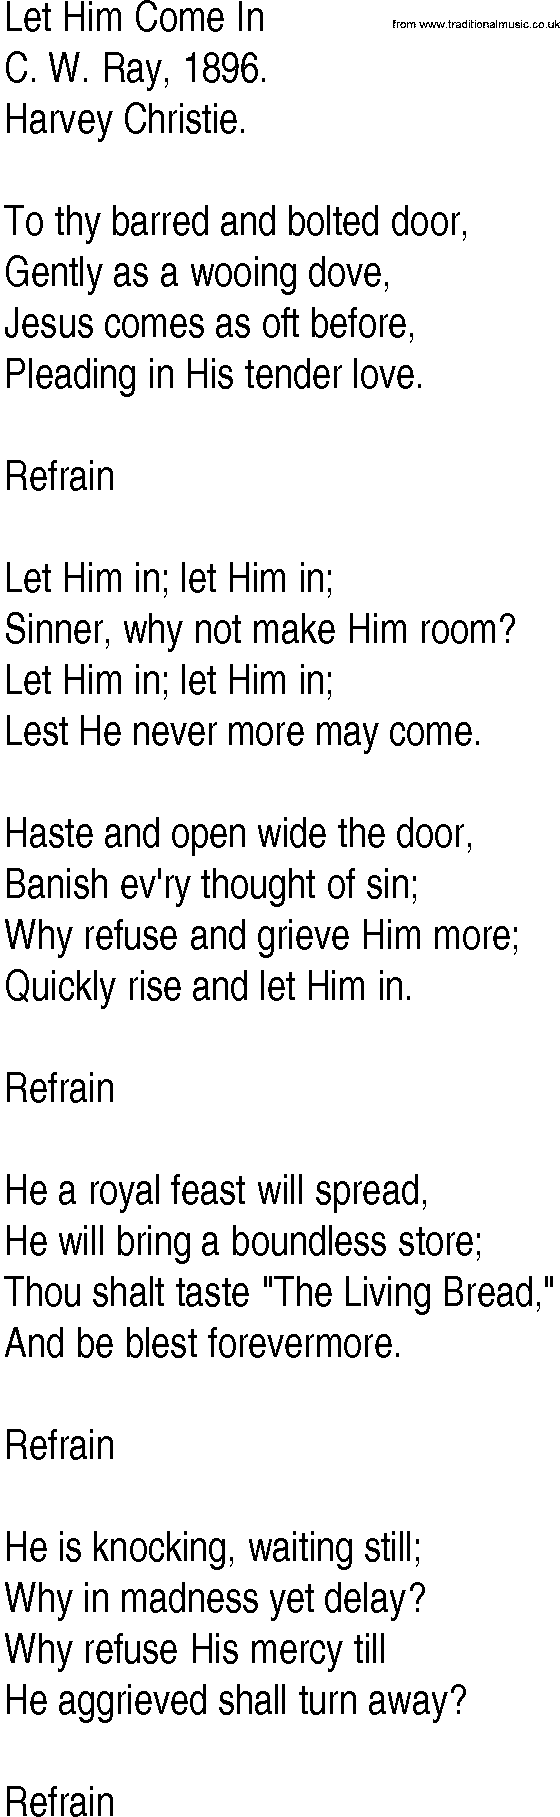 Hymn and Gospel Song: Let Him Come In by C W Ray lyrics